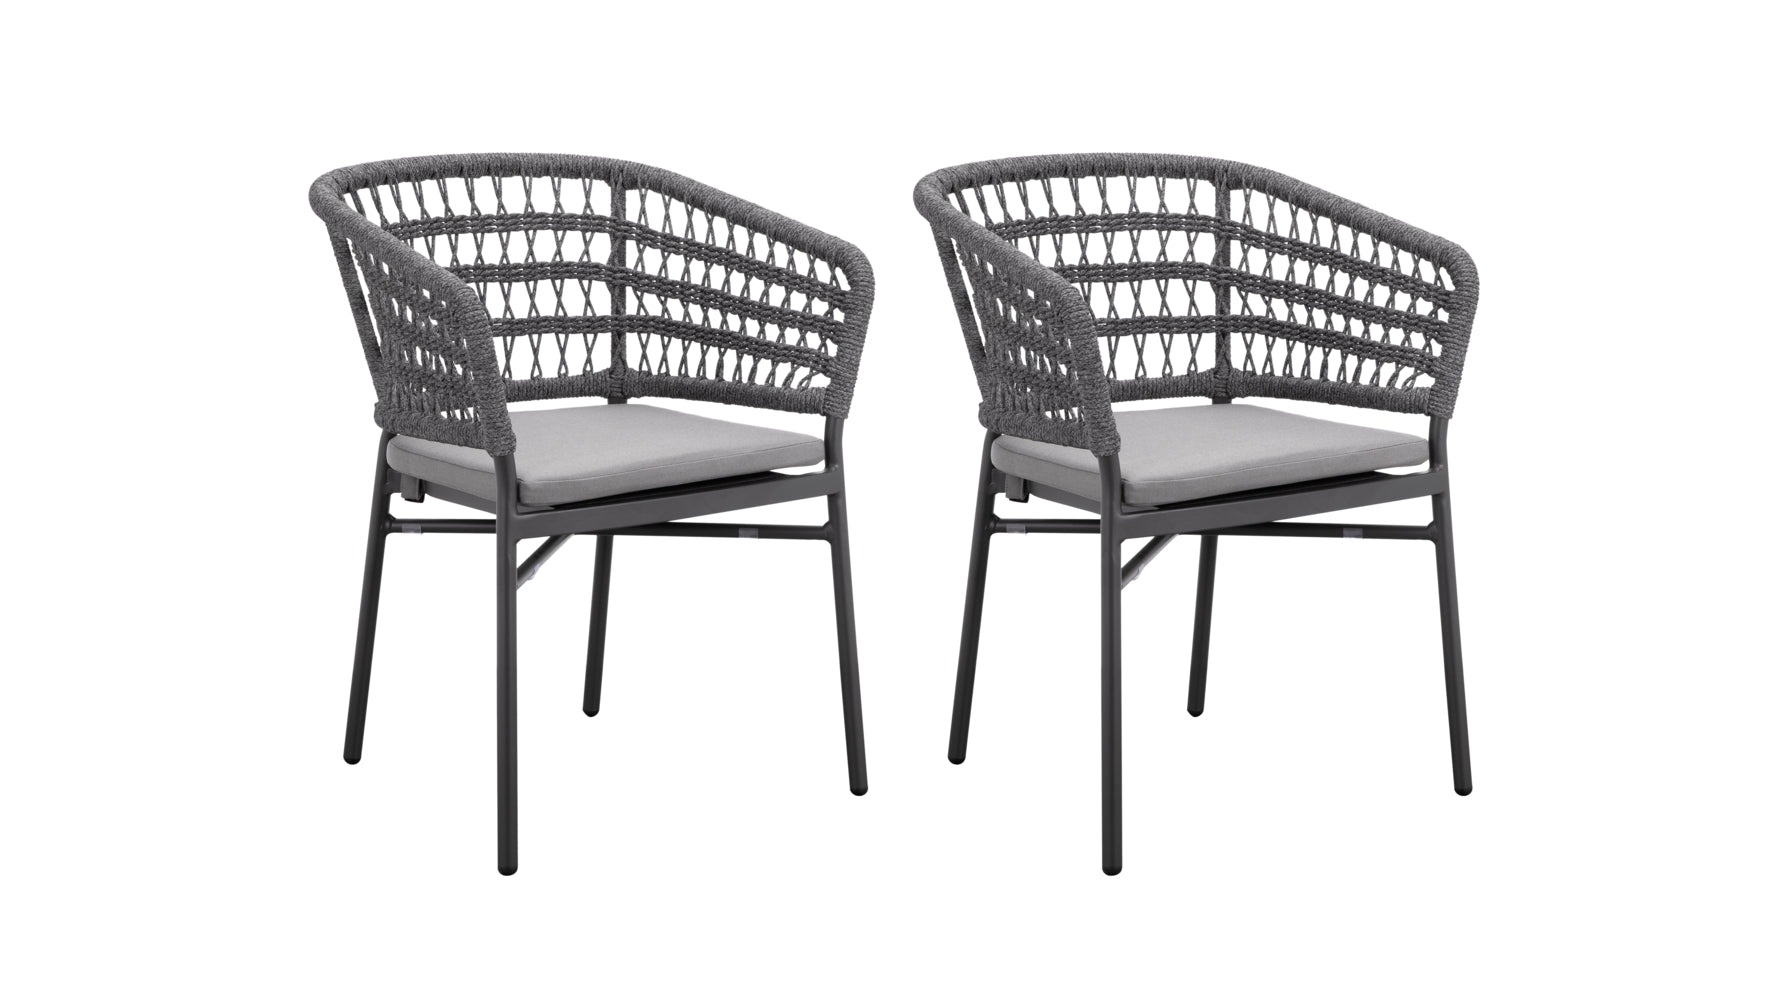 Take It Easy Outdoor Dining Chair (Set of Two), Granite - Image 2